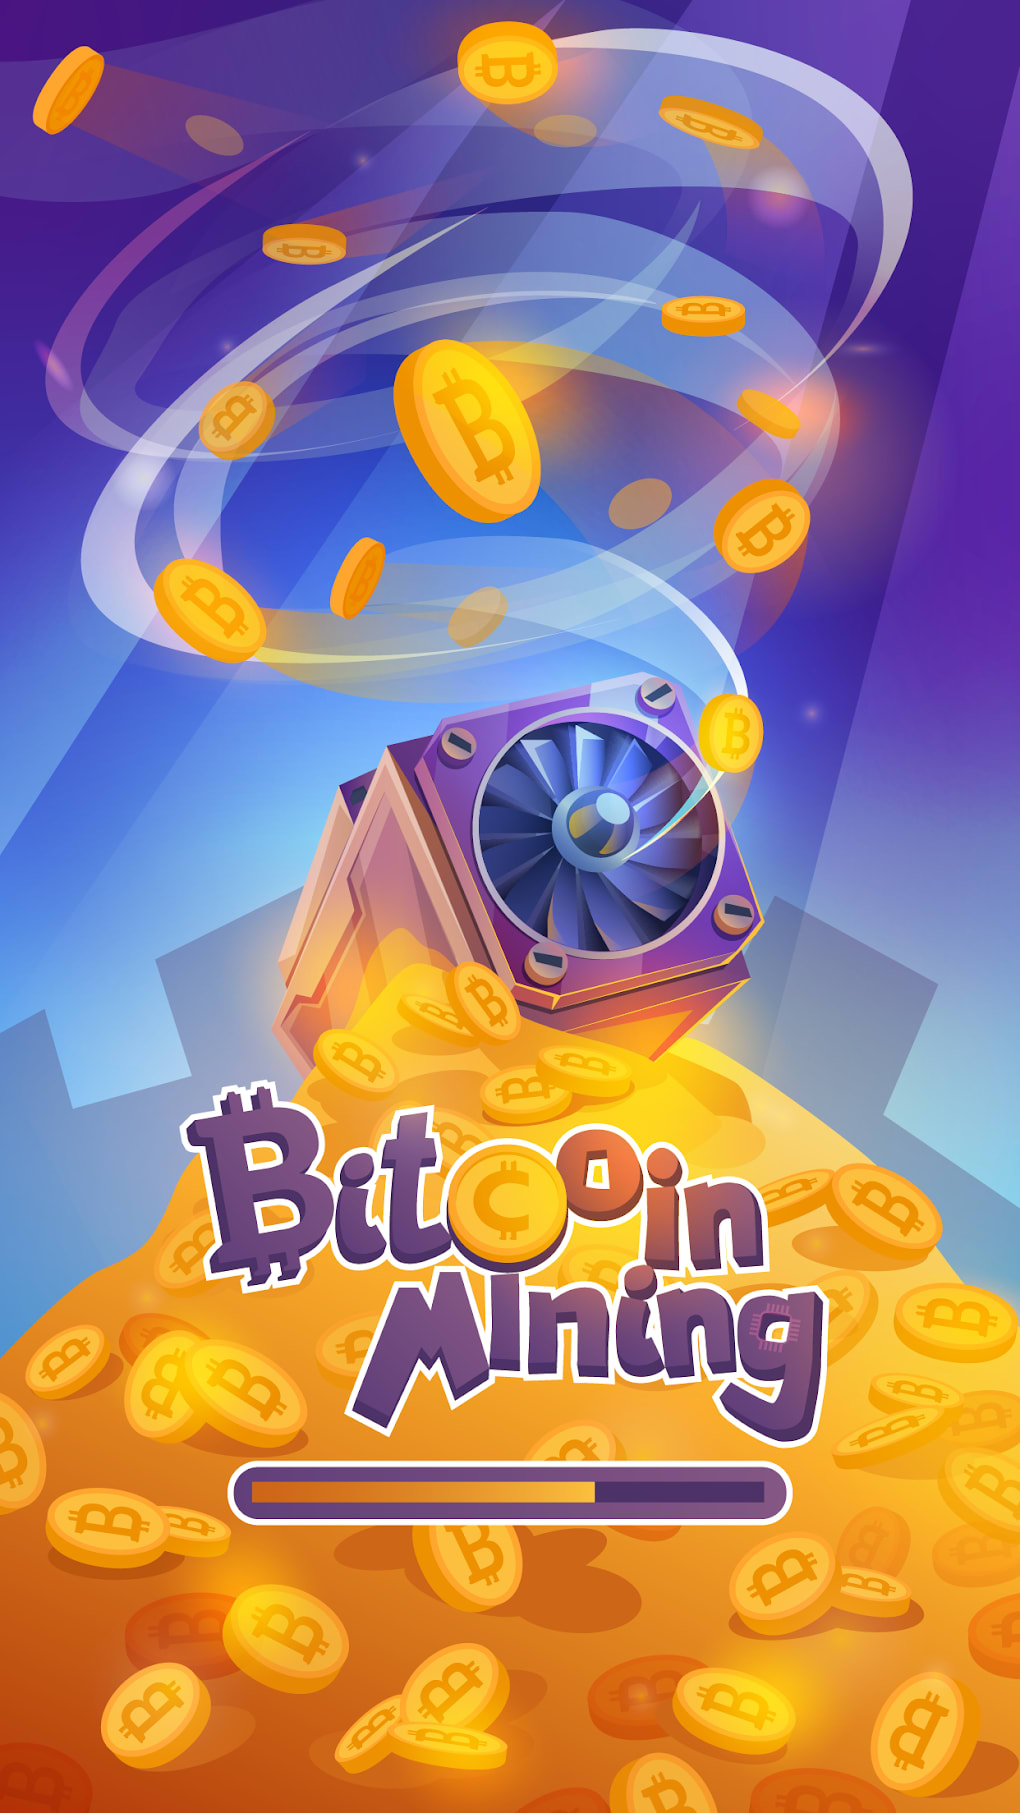 Cryptomining Game - Free Blockchain Games to get BTC